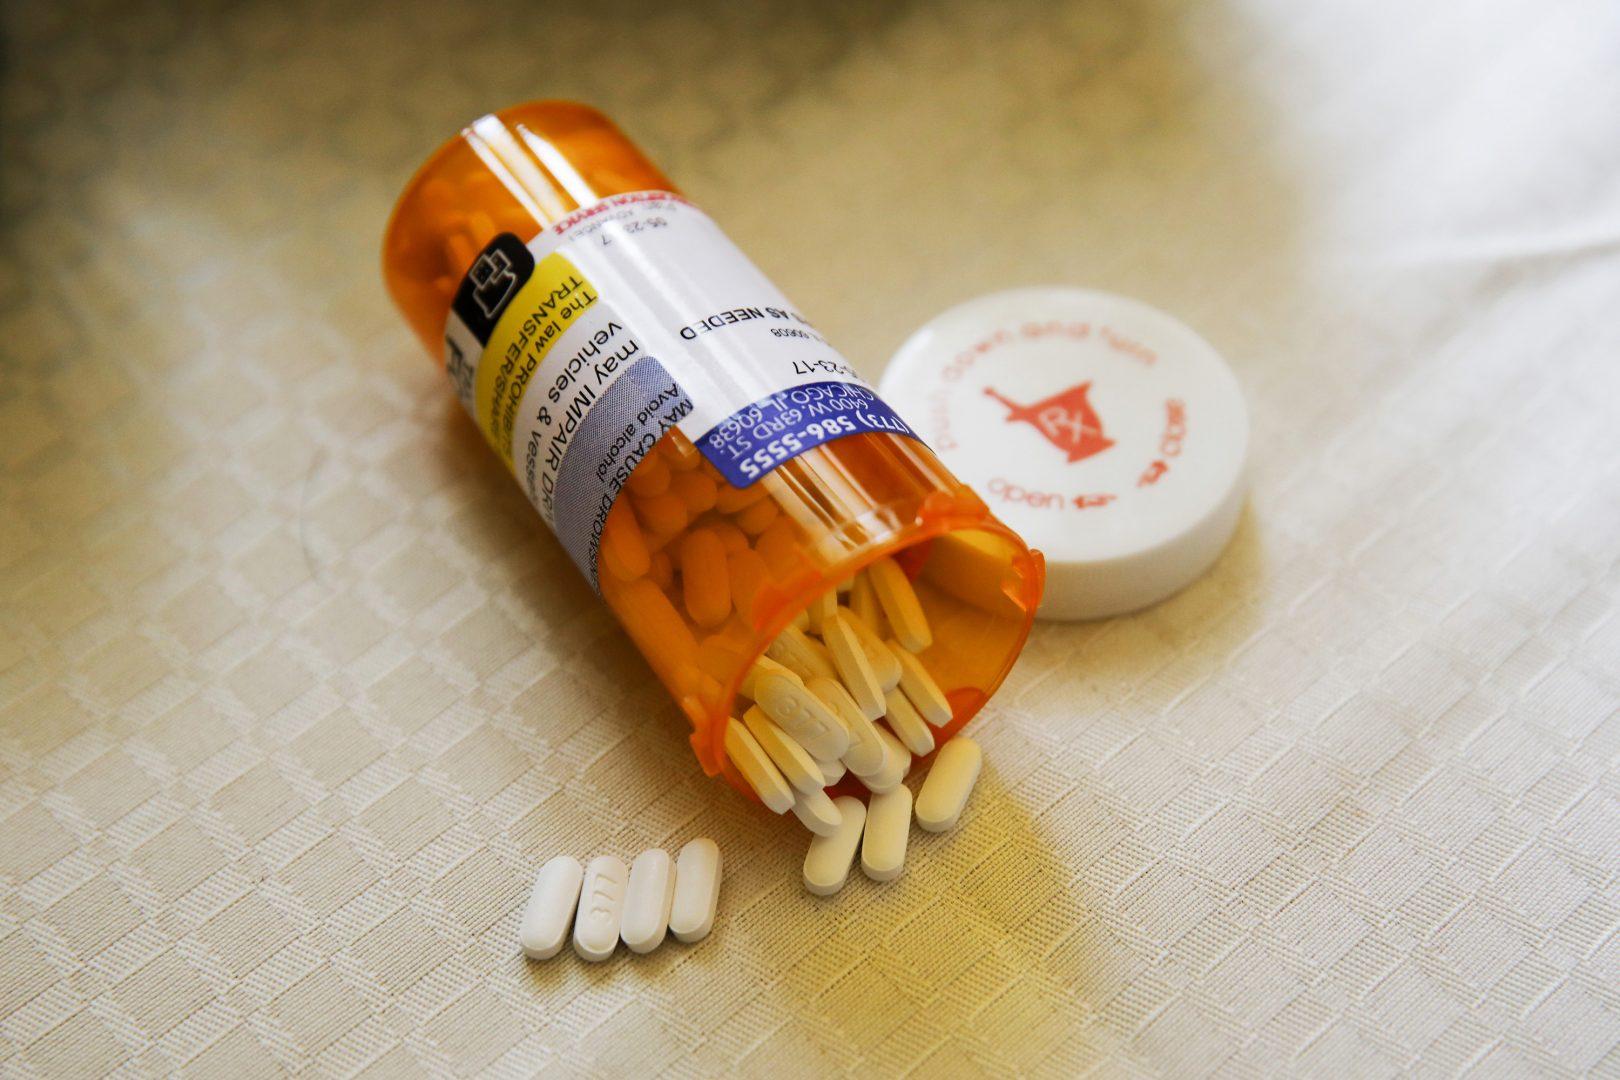 Jim Watkins tramadol pills, an opioid he takes for serious pain caused by osteogenesis imperfecta, also known as brittle bone disease. (Jose M. Osorio/Chicago Tribune/TNS)